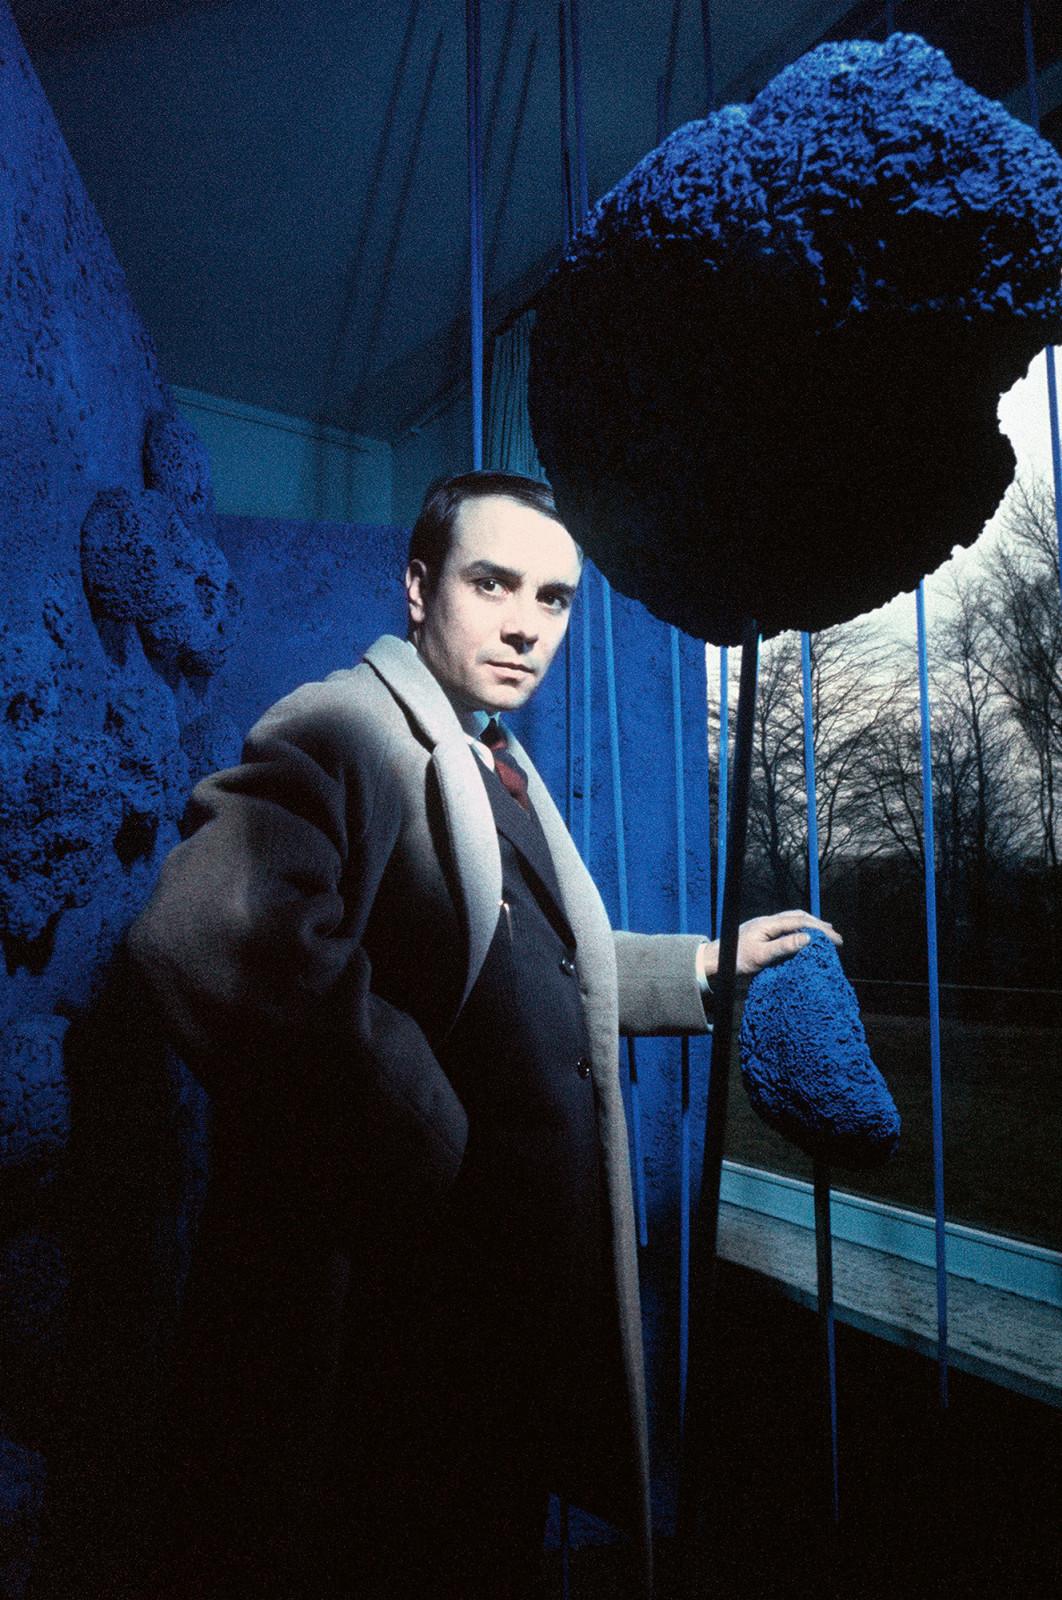 Yves Klein surrounded by his works at the exhibition "Yves Klein Monochrome und Feuer" at the Museum Haus Lange